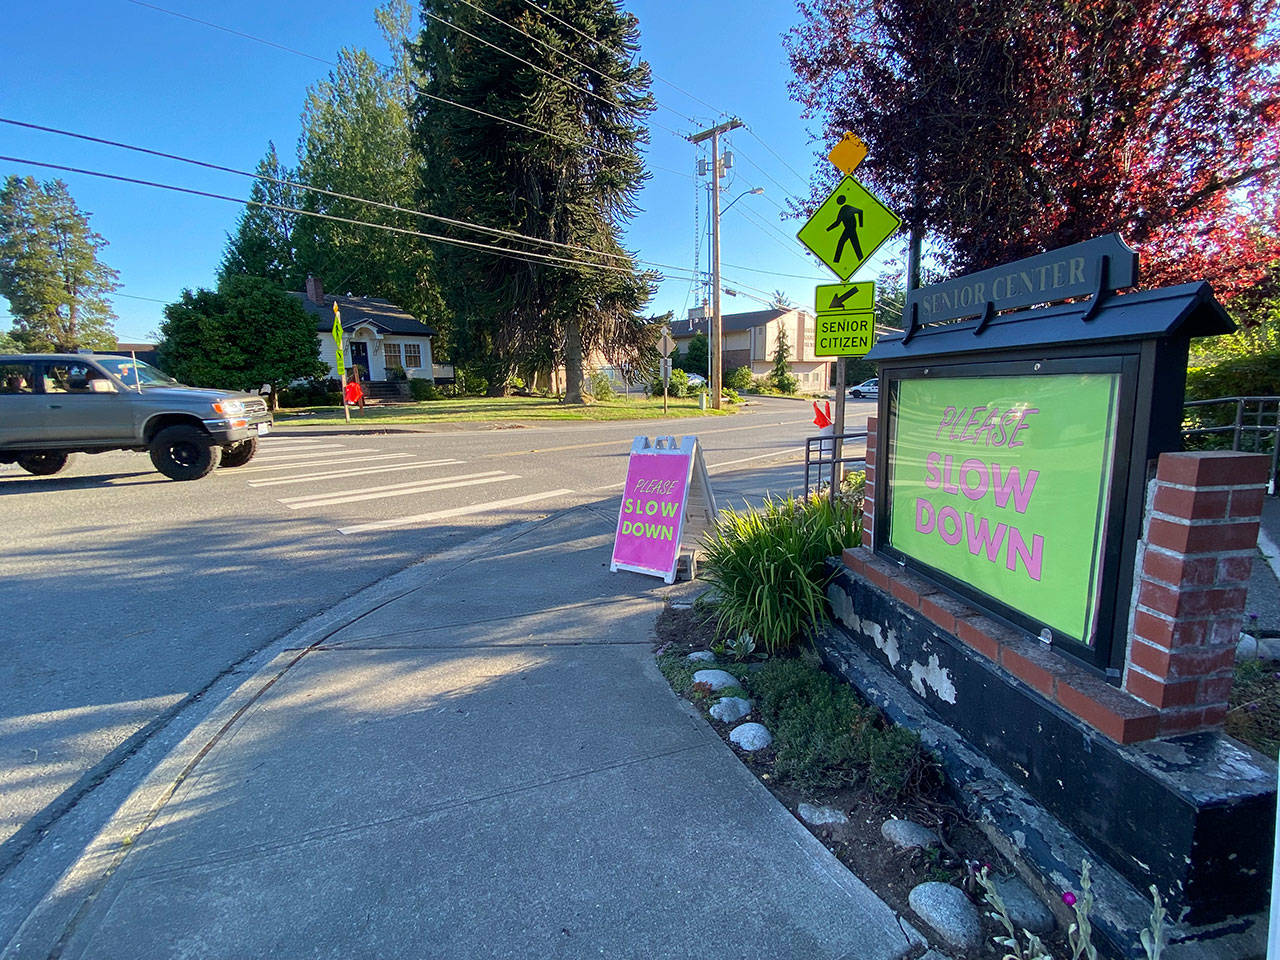 Signs in front of Vashon’s Senior Center warn drivers to slow down as they approach the intersection of Bank Road and 100th Ave. S.W. Bright orange crossing flags for pedestrians have also been installed at the intersection (Tom Hughes Photo).